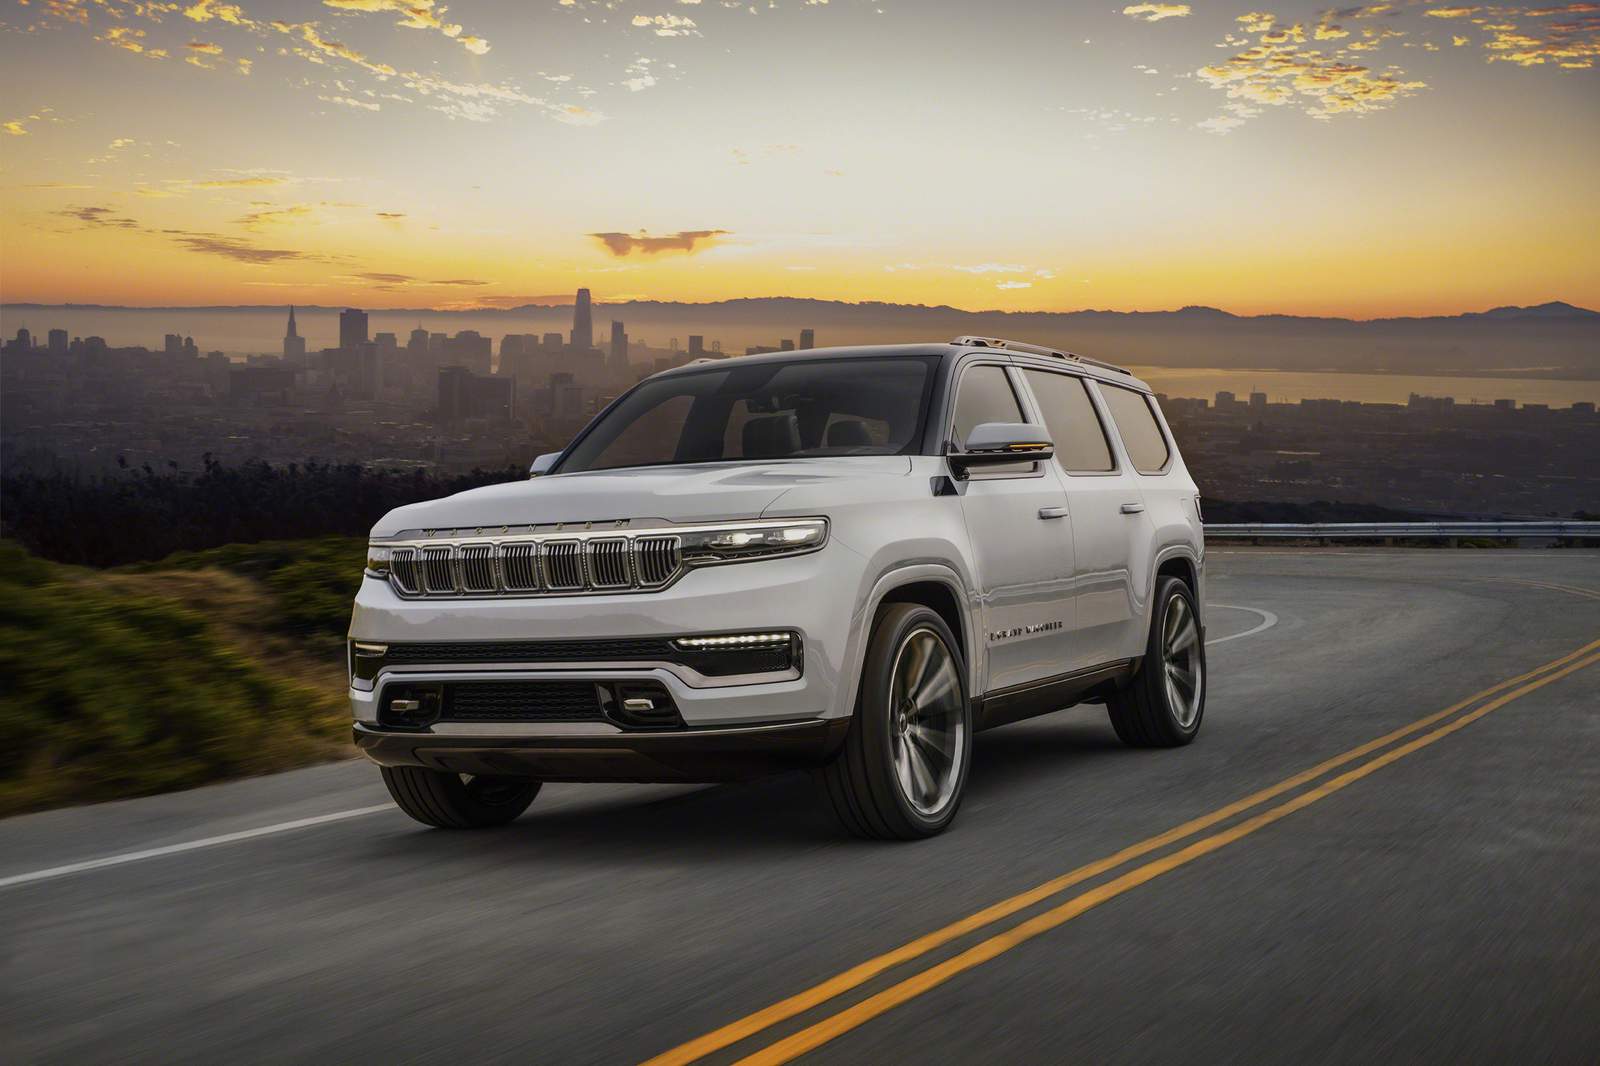 Jeep introduces its newest concept SUV: Grand Wagoneer